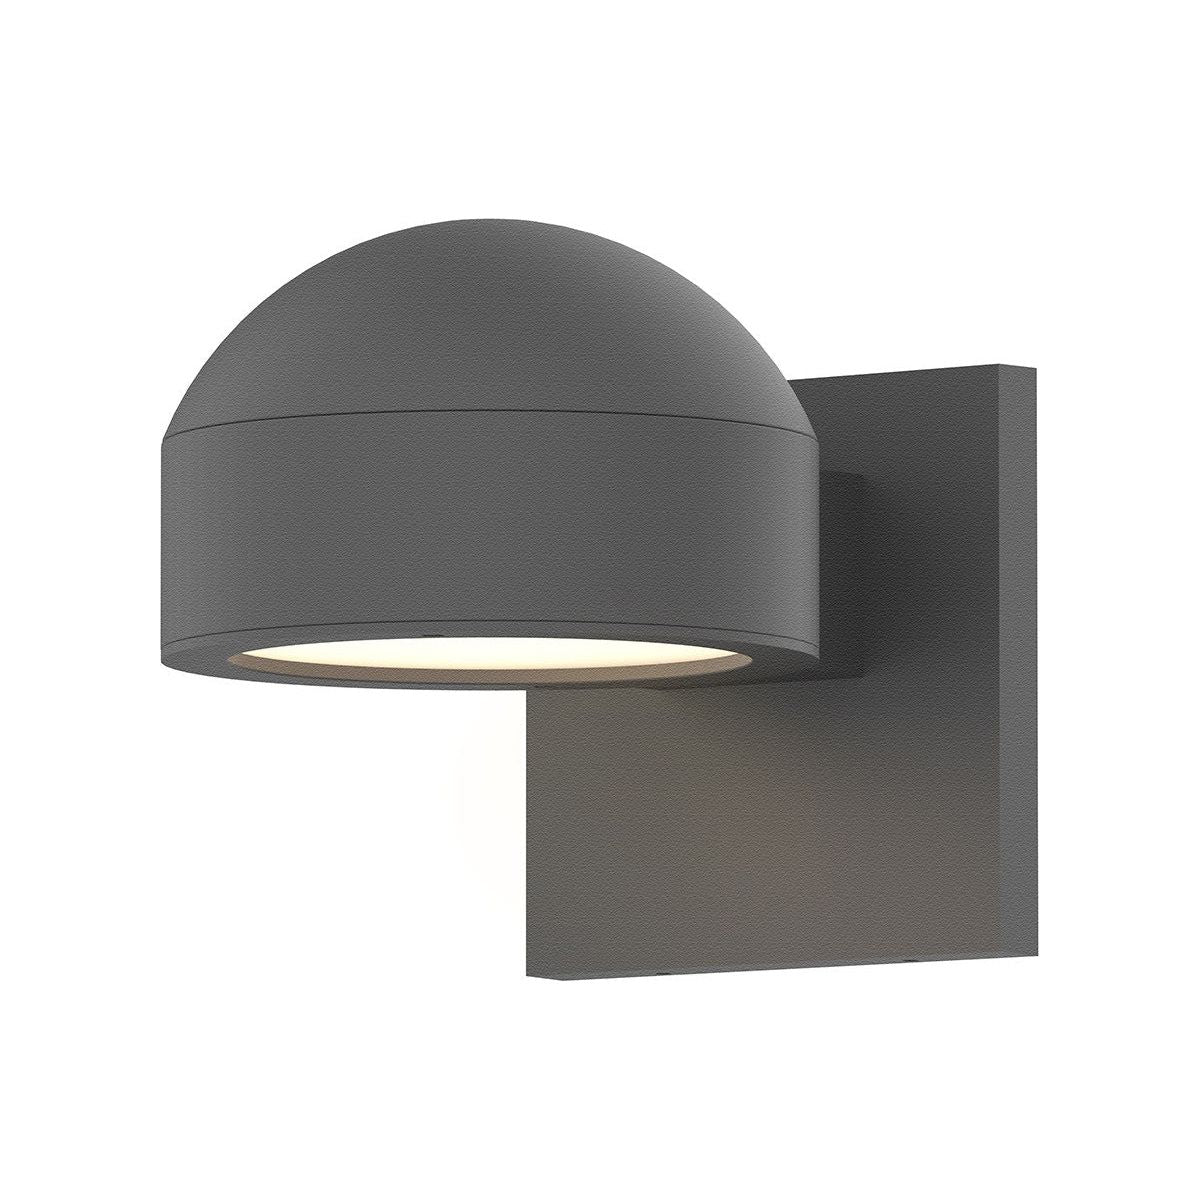 REALS Downlight LED Sconce with Dome Cap and Plate Lens